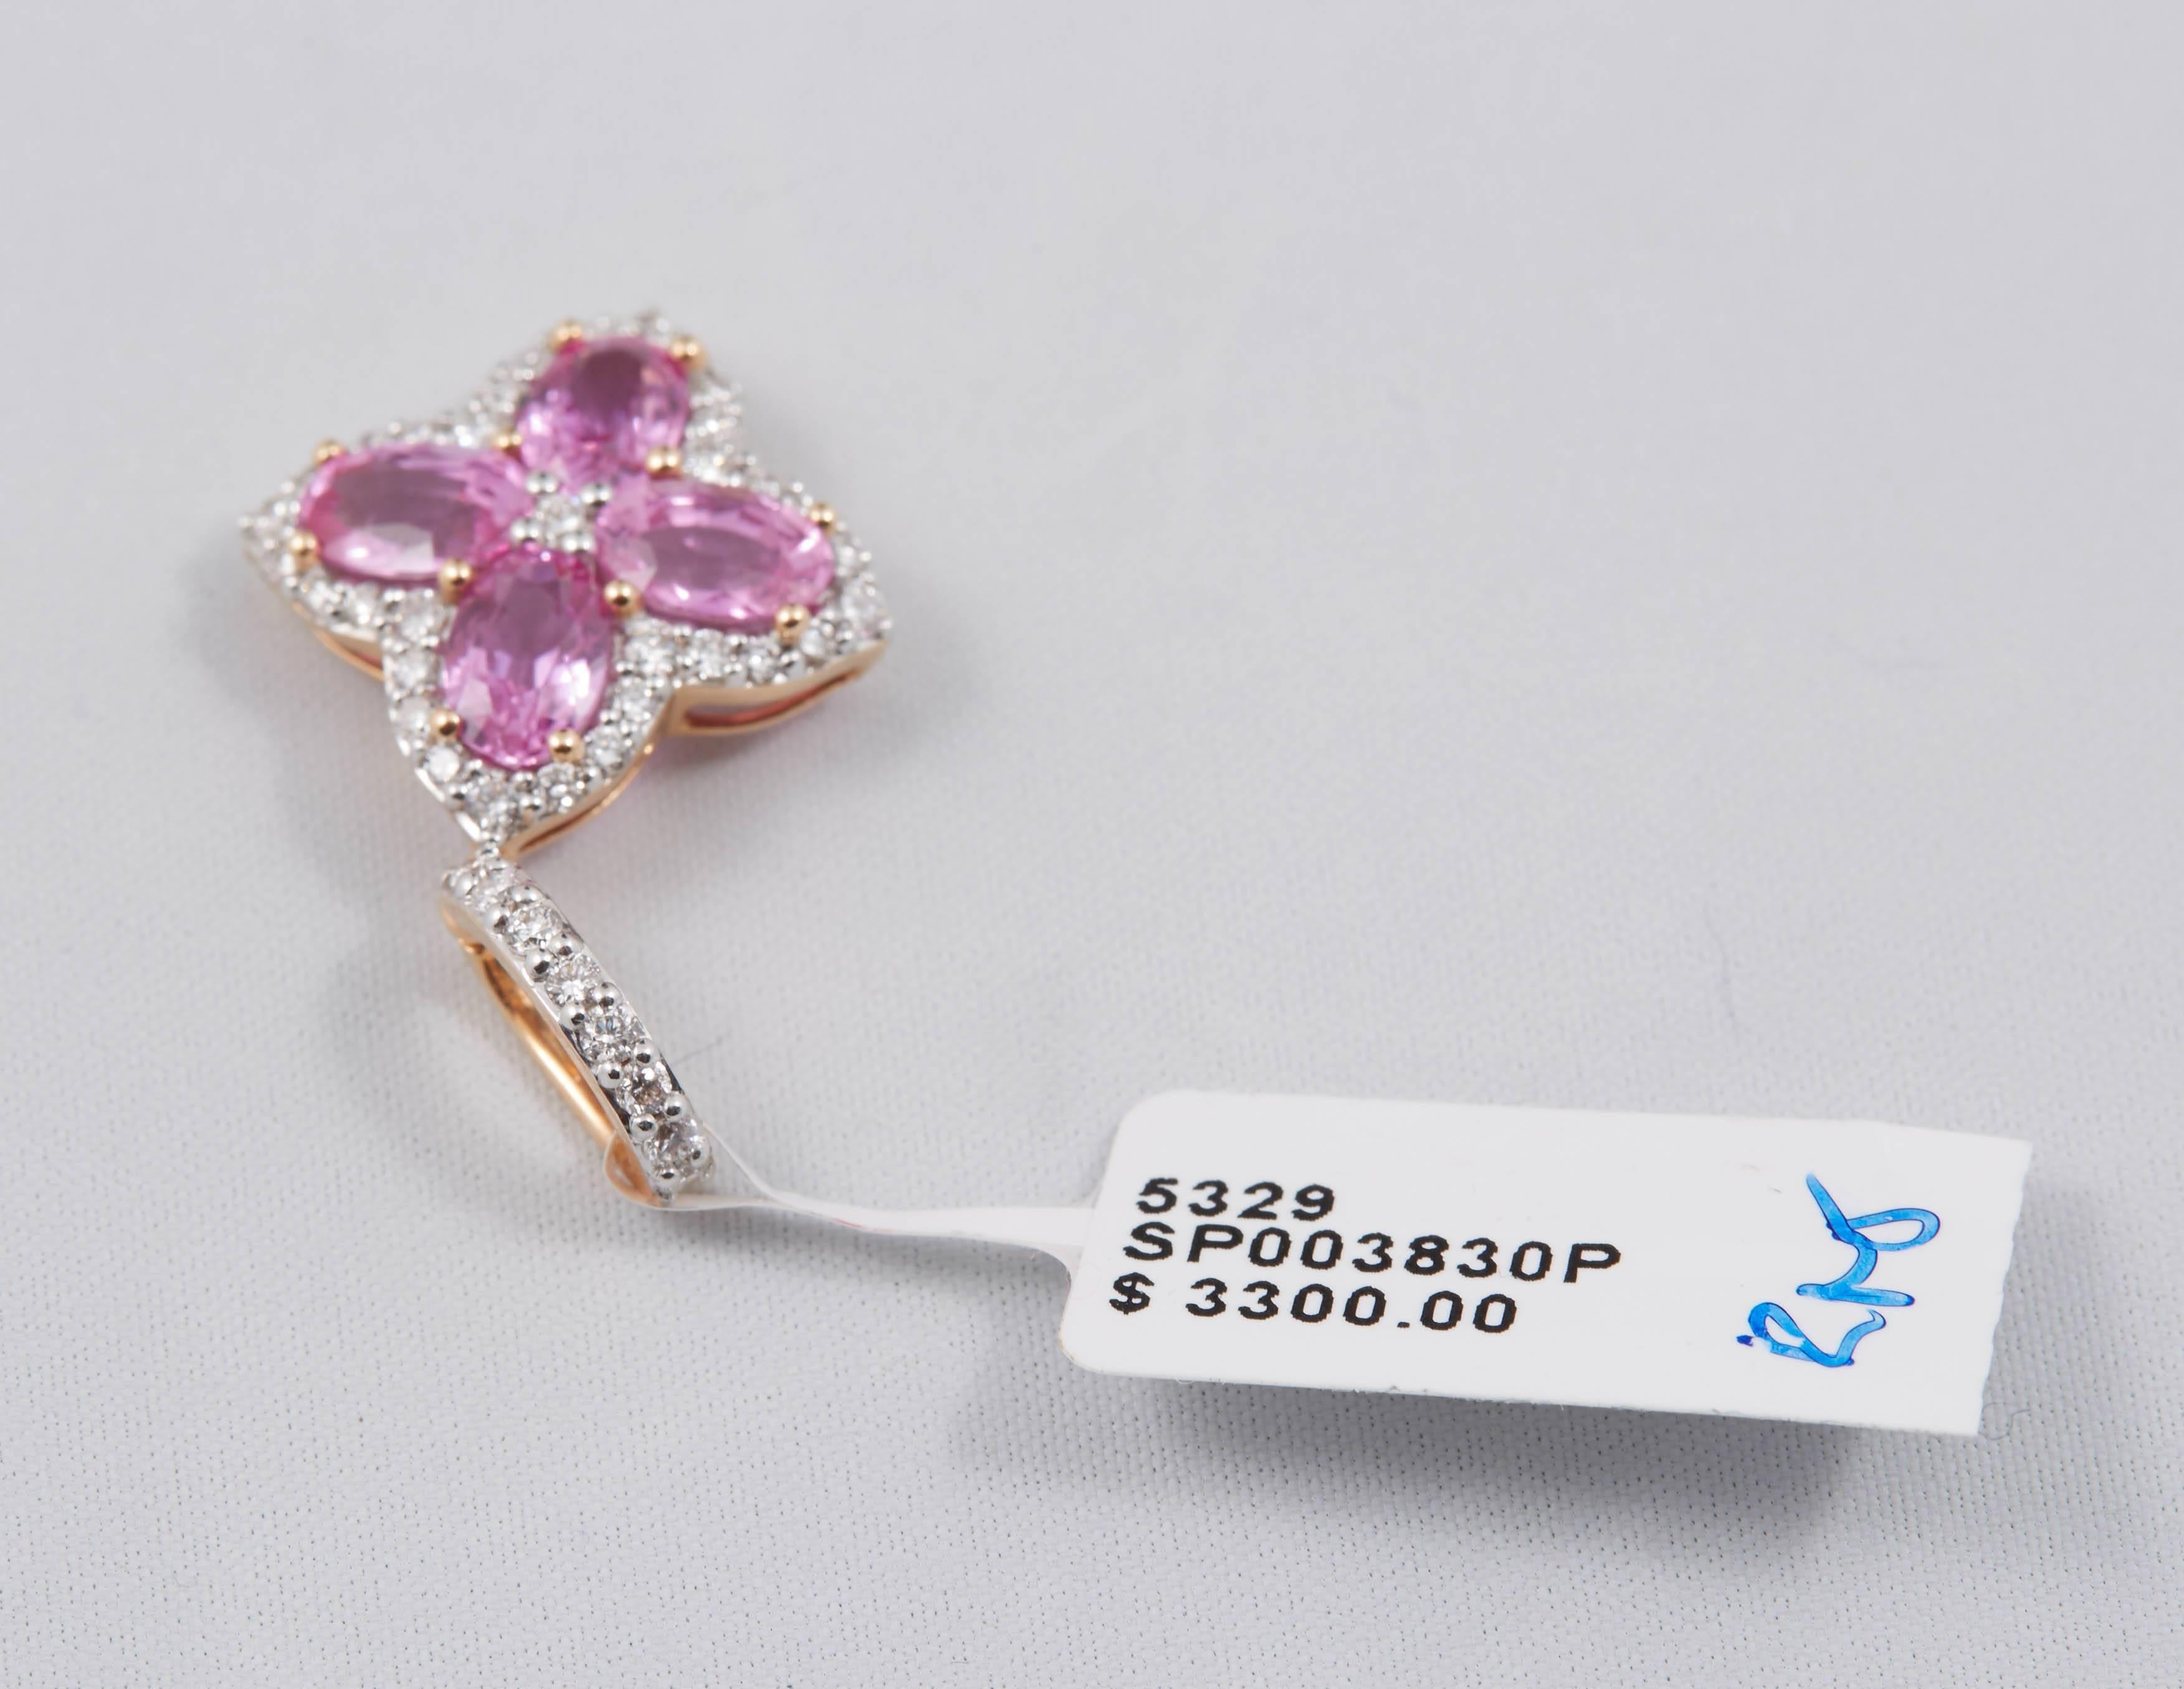 or rose 18K 2.1 G.
4 saphirs roses 2,39 Cts.
41 diamants ronds 0,42 Cts.